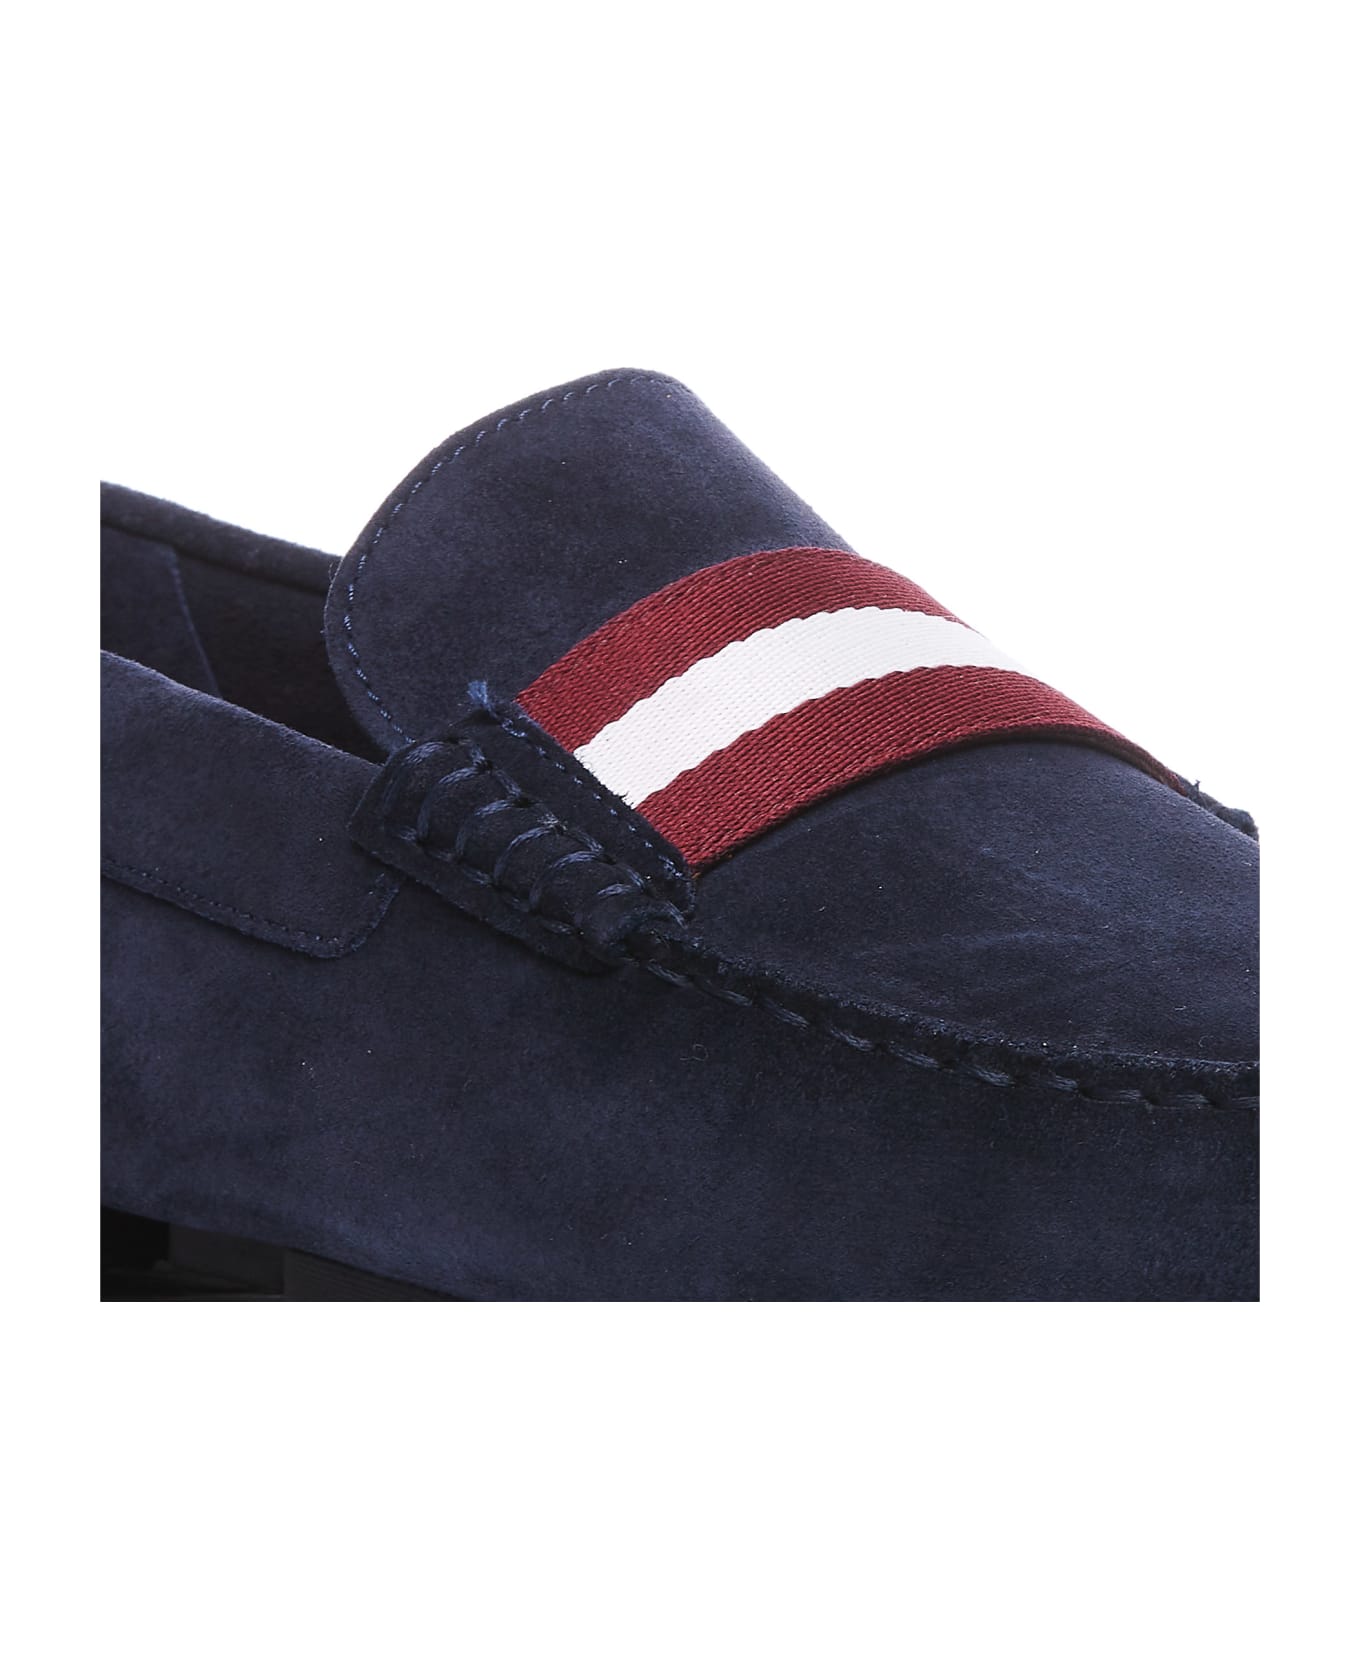 Bally Perthy Loafers - Blue